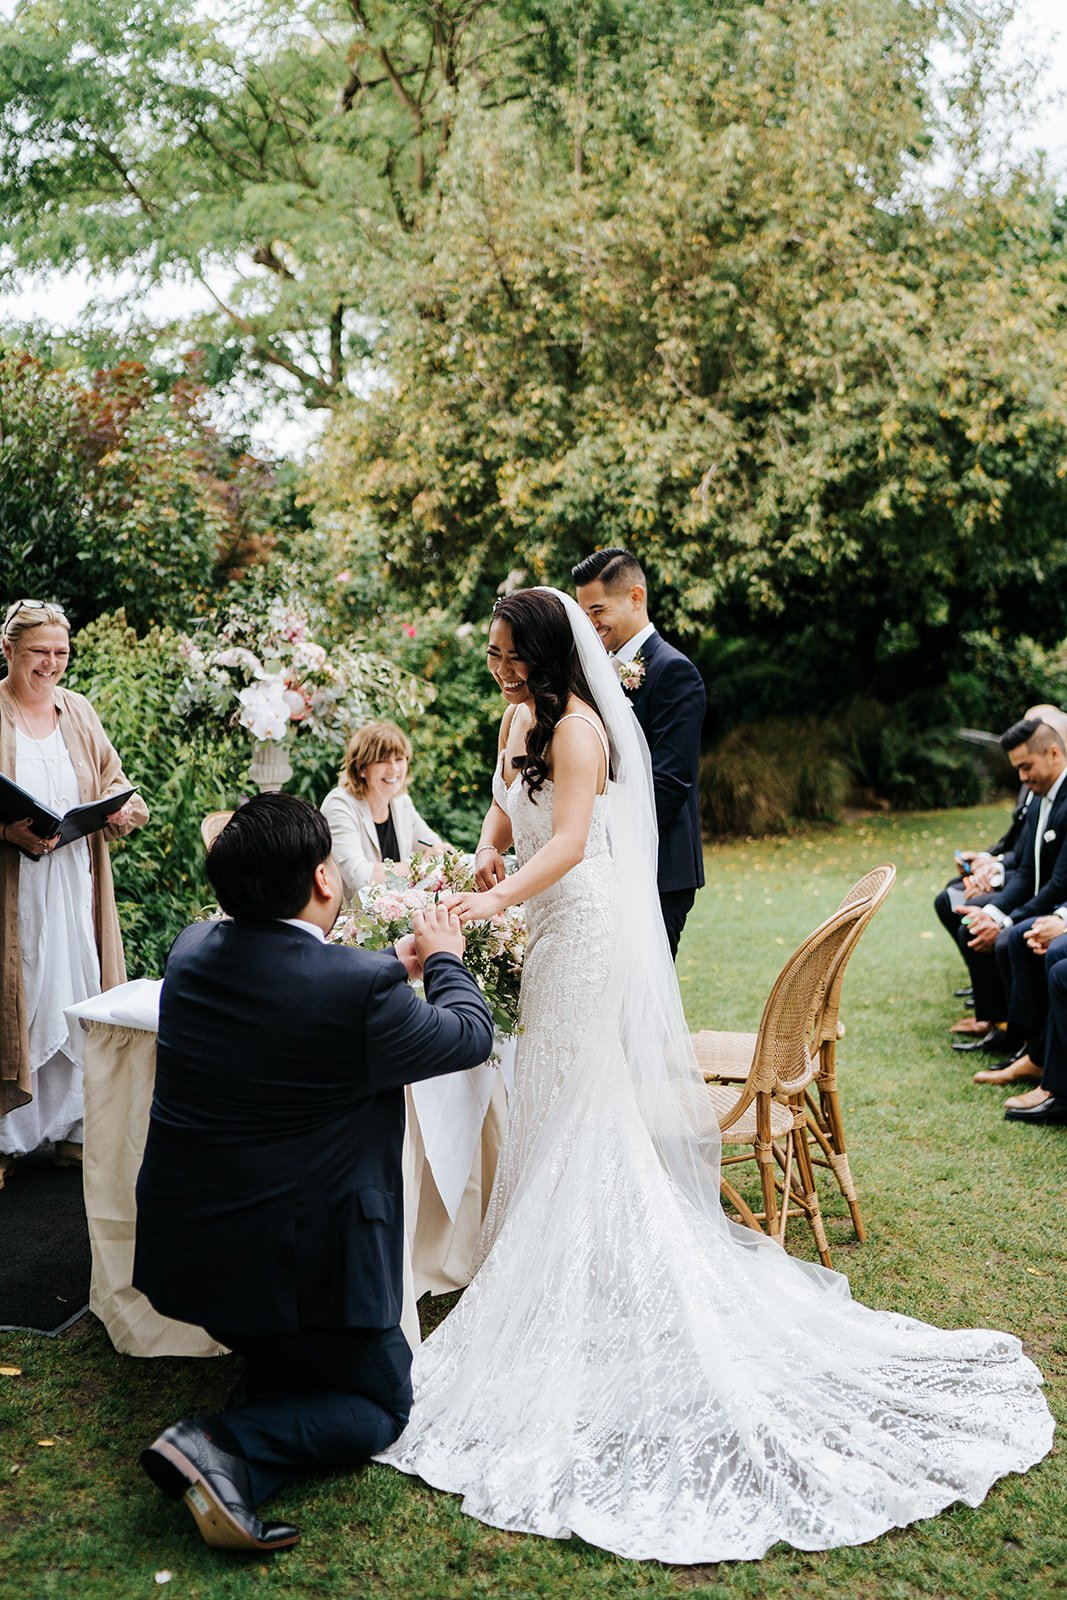 Best man kneels as he delivers rings to a laughing bride in unexpected moment